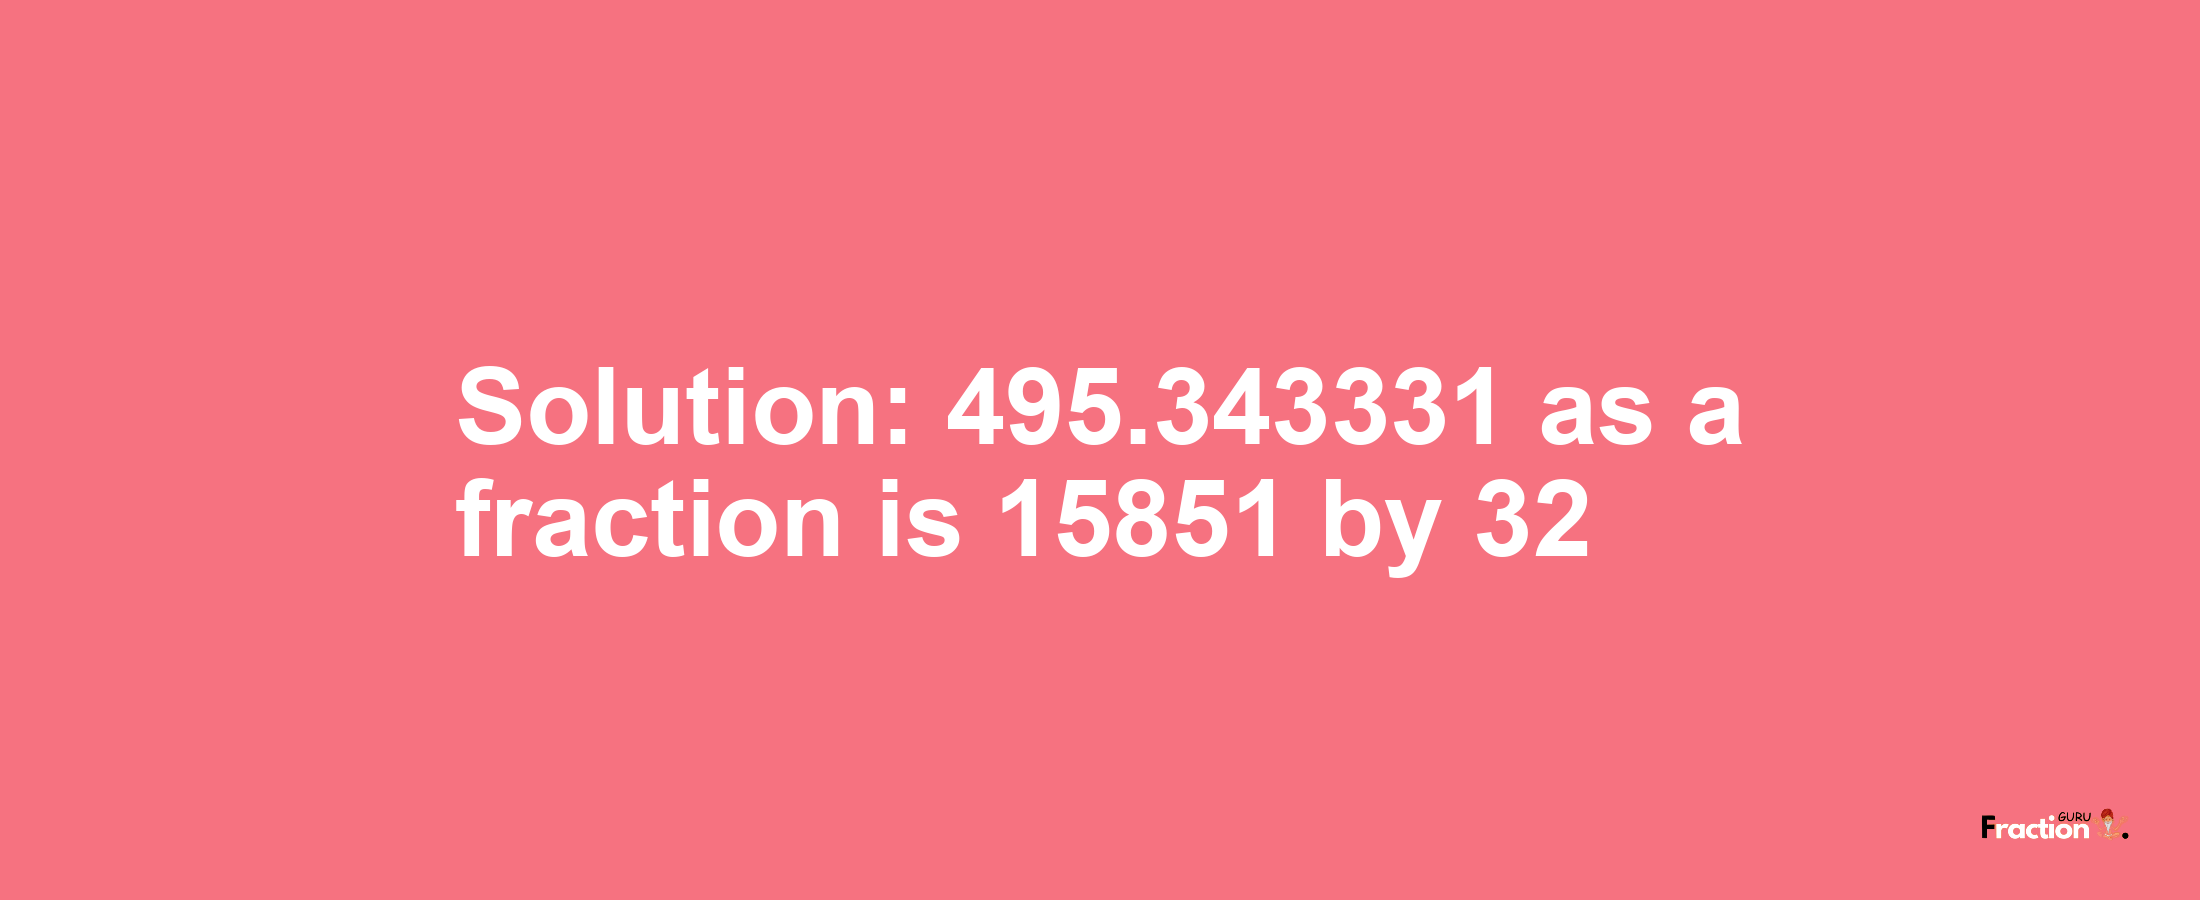 Solution:495.343331 as a fraction is 15851/32